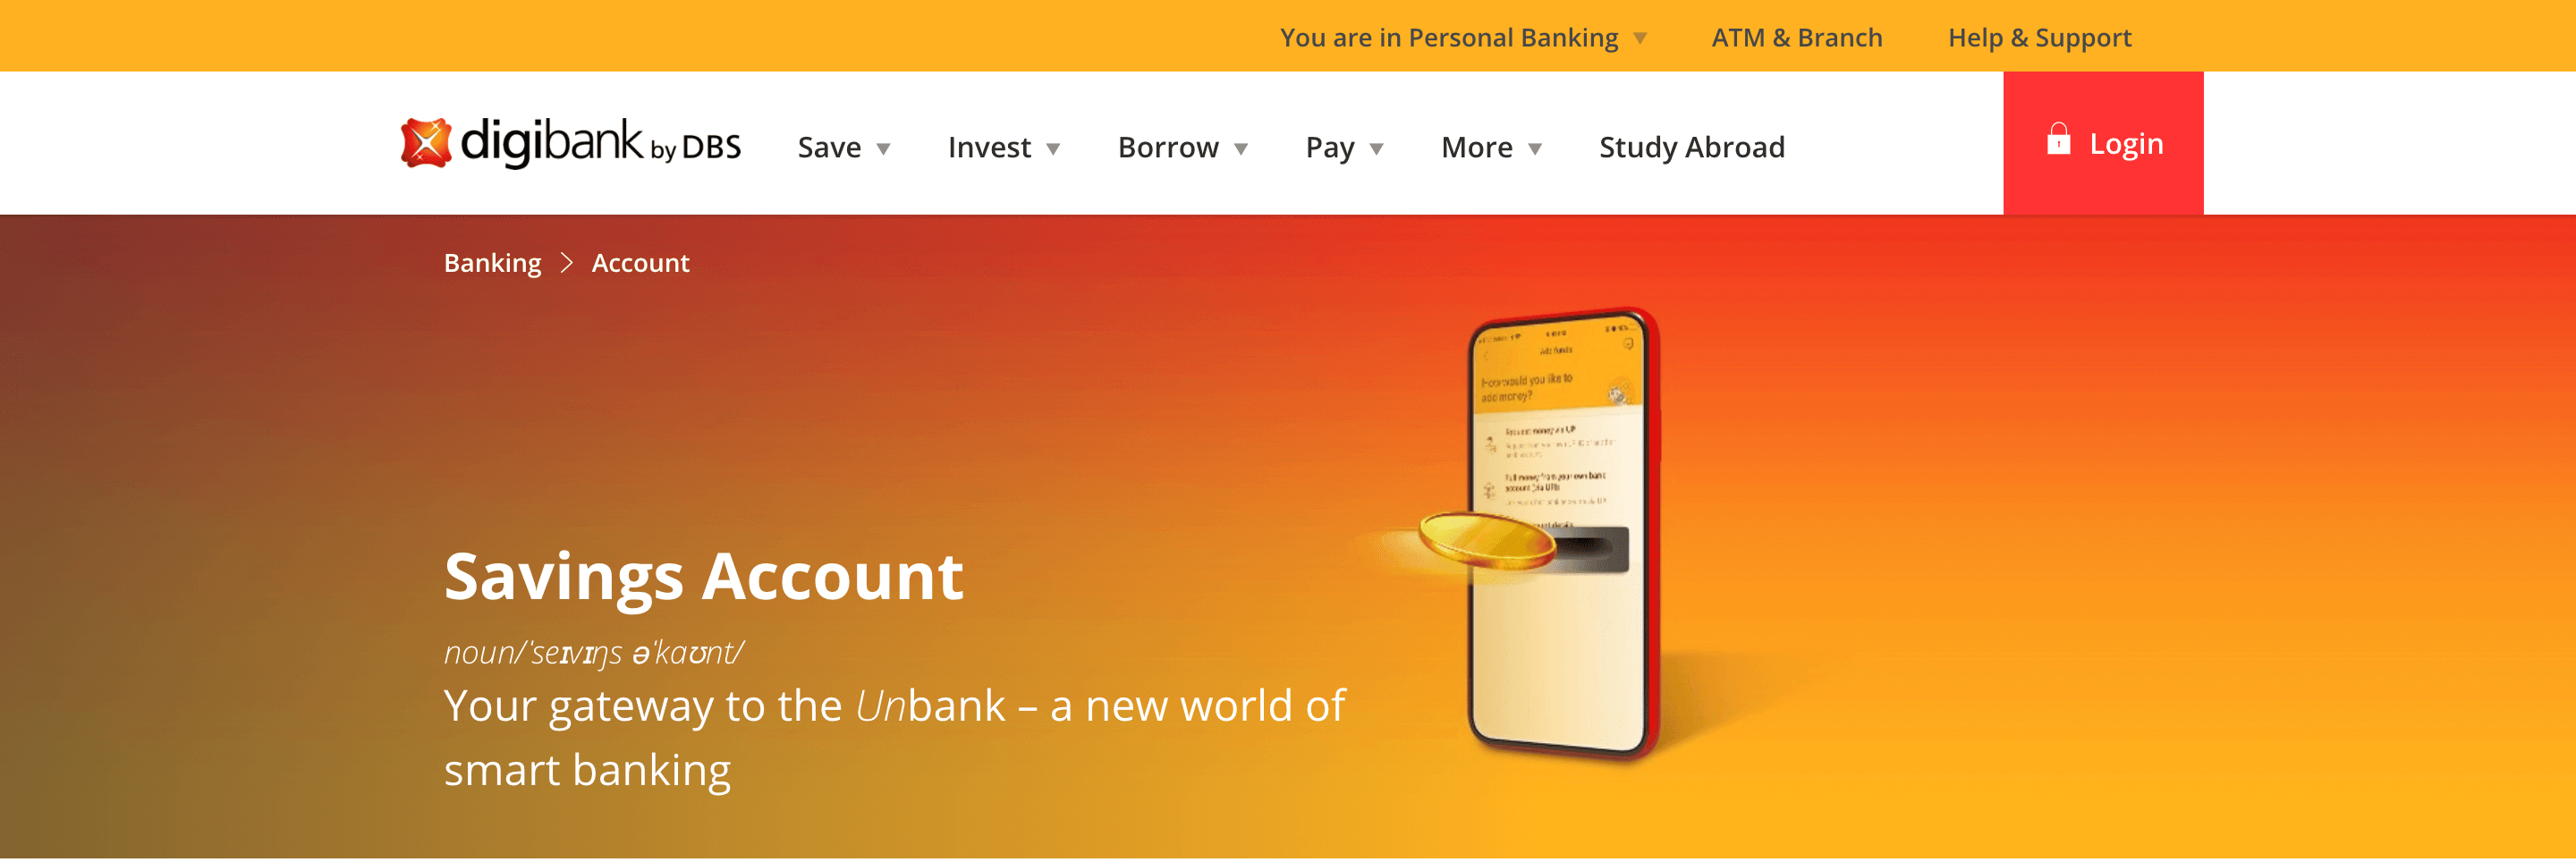 Digibank, a neobank by Traditional Banking Institution DBS.